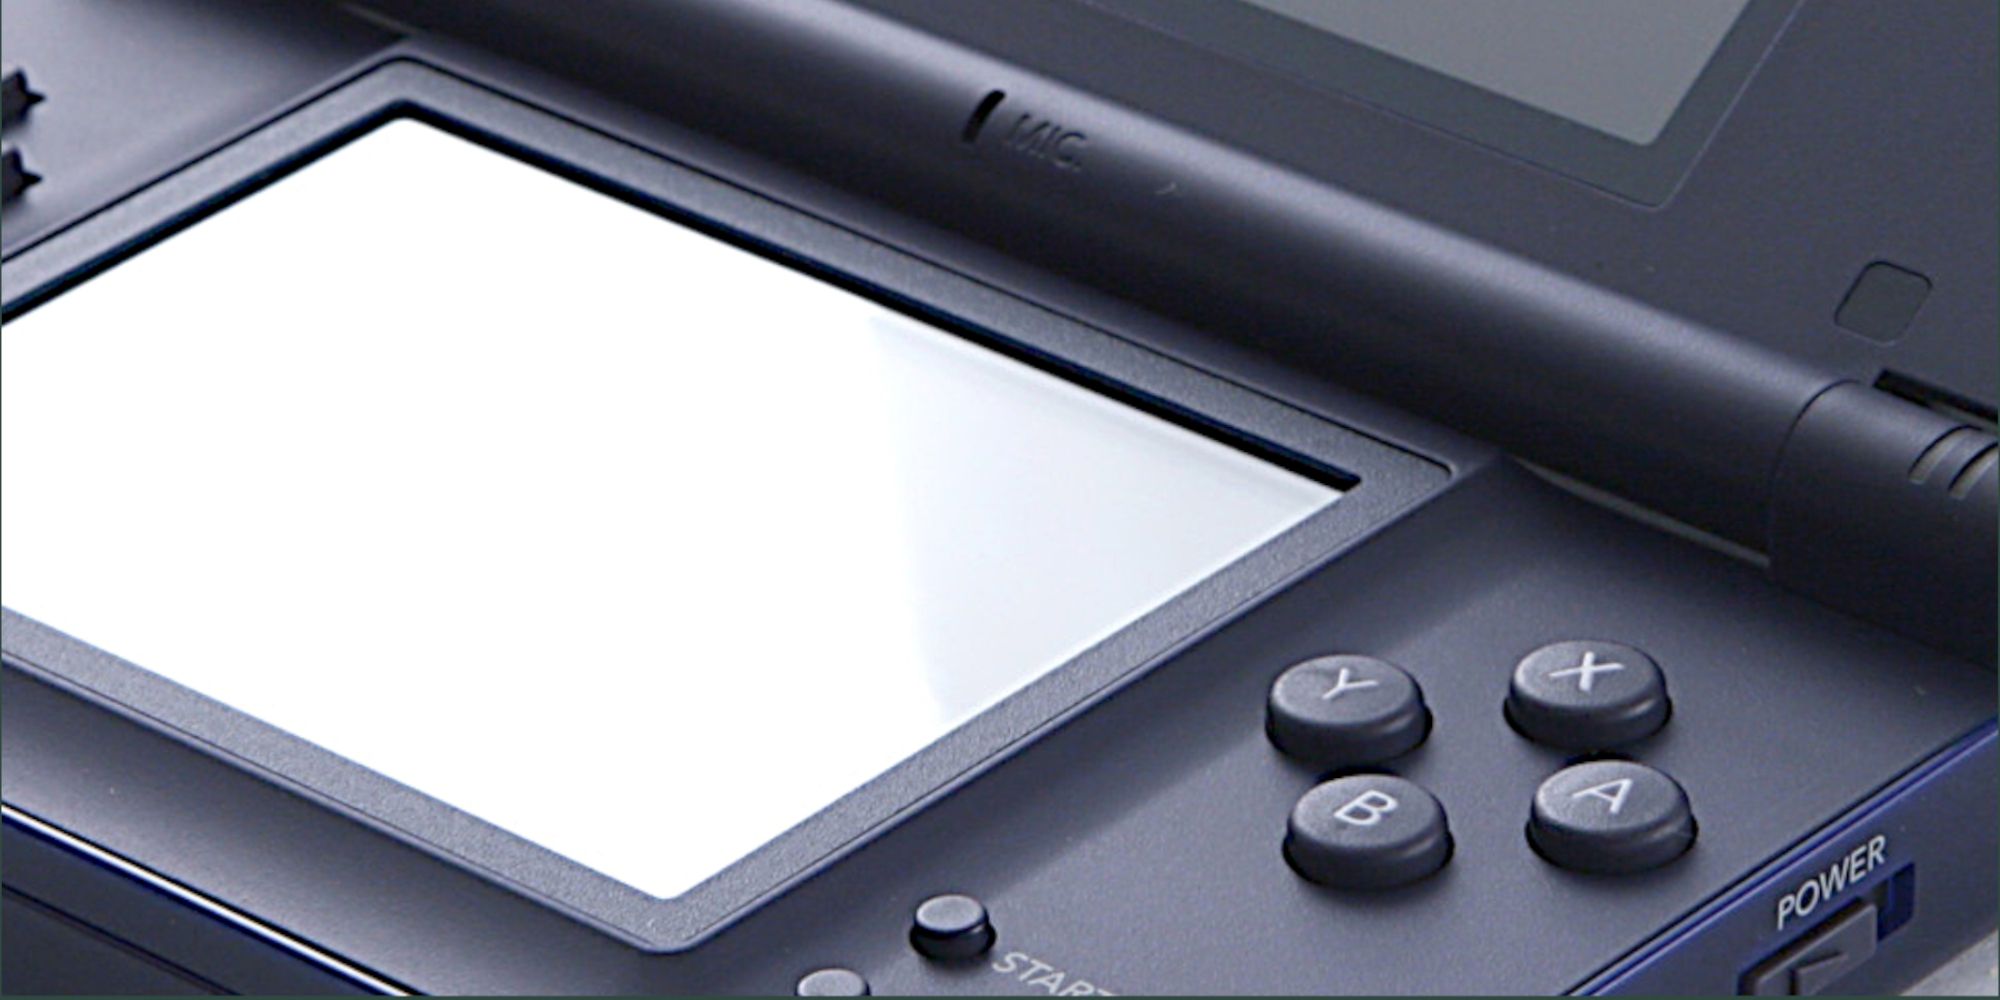 Things The Nintendo DS Did Better Than Most Other Handheld Consoles